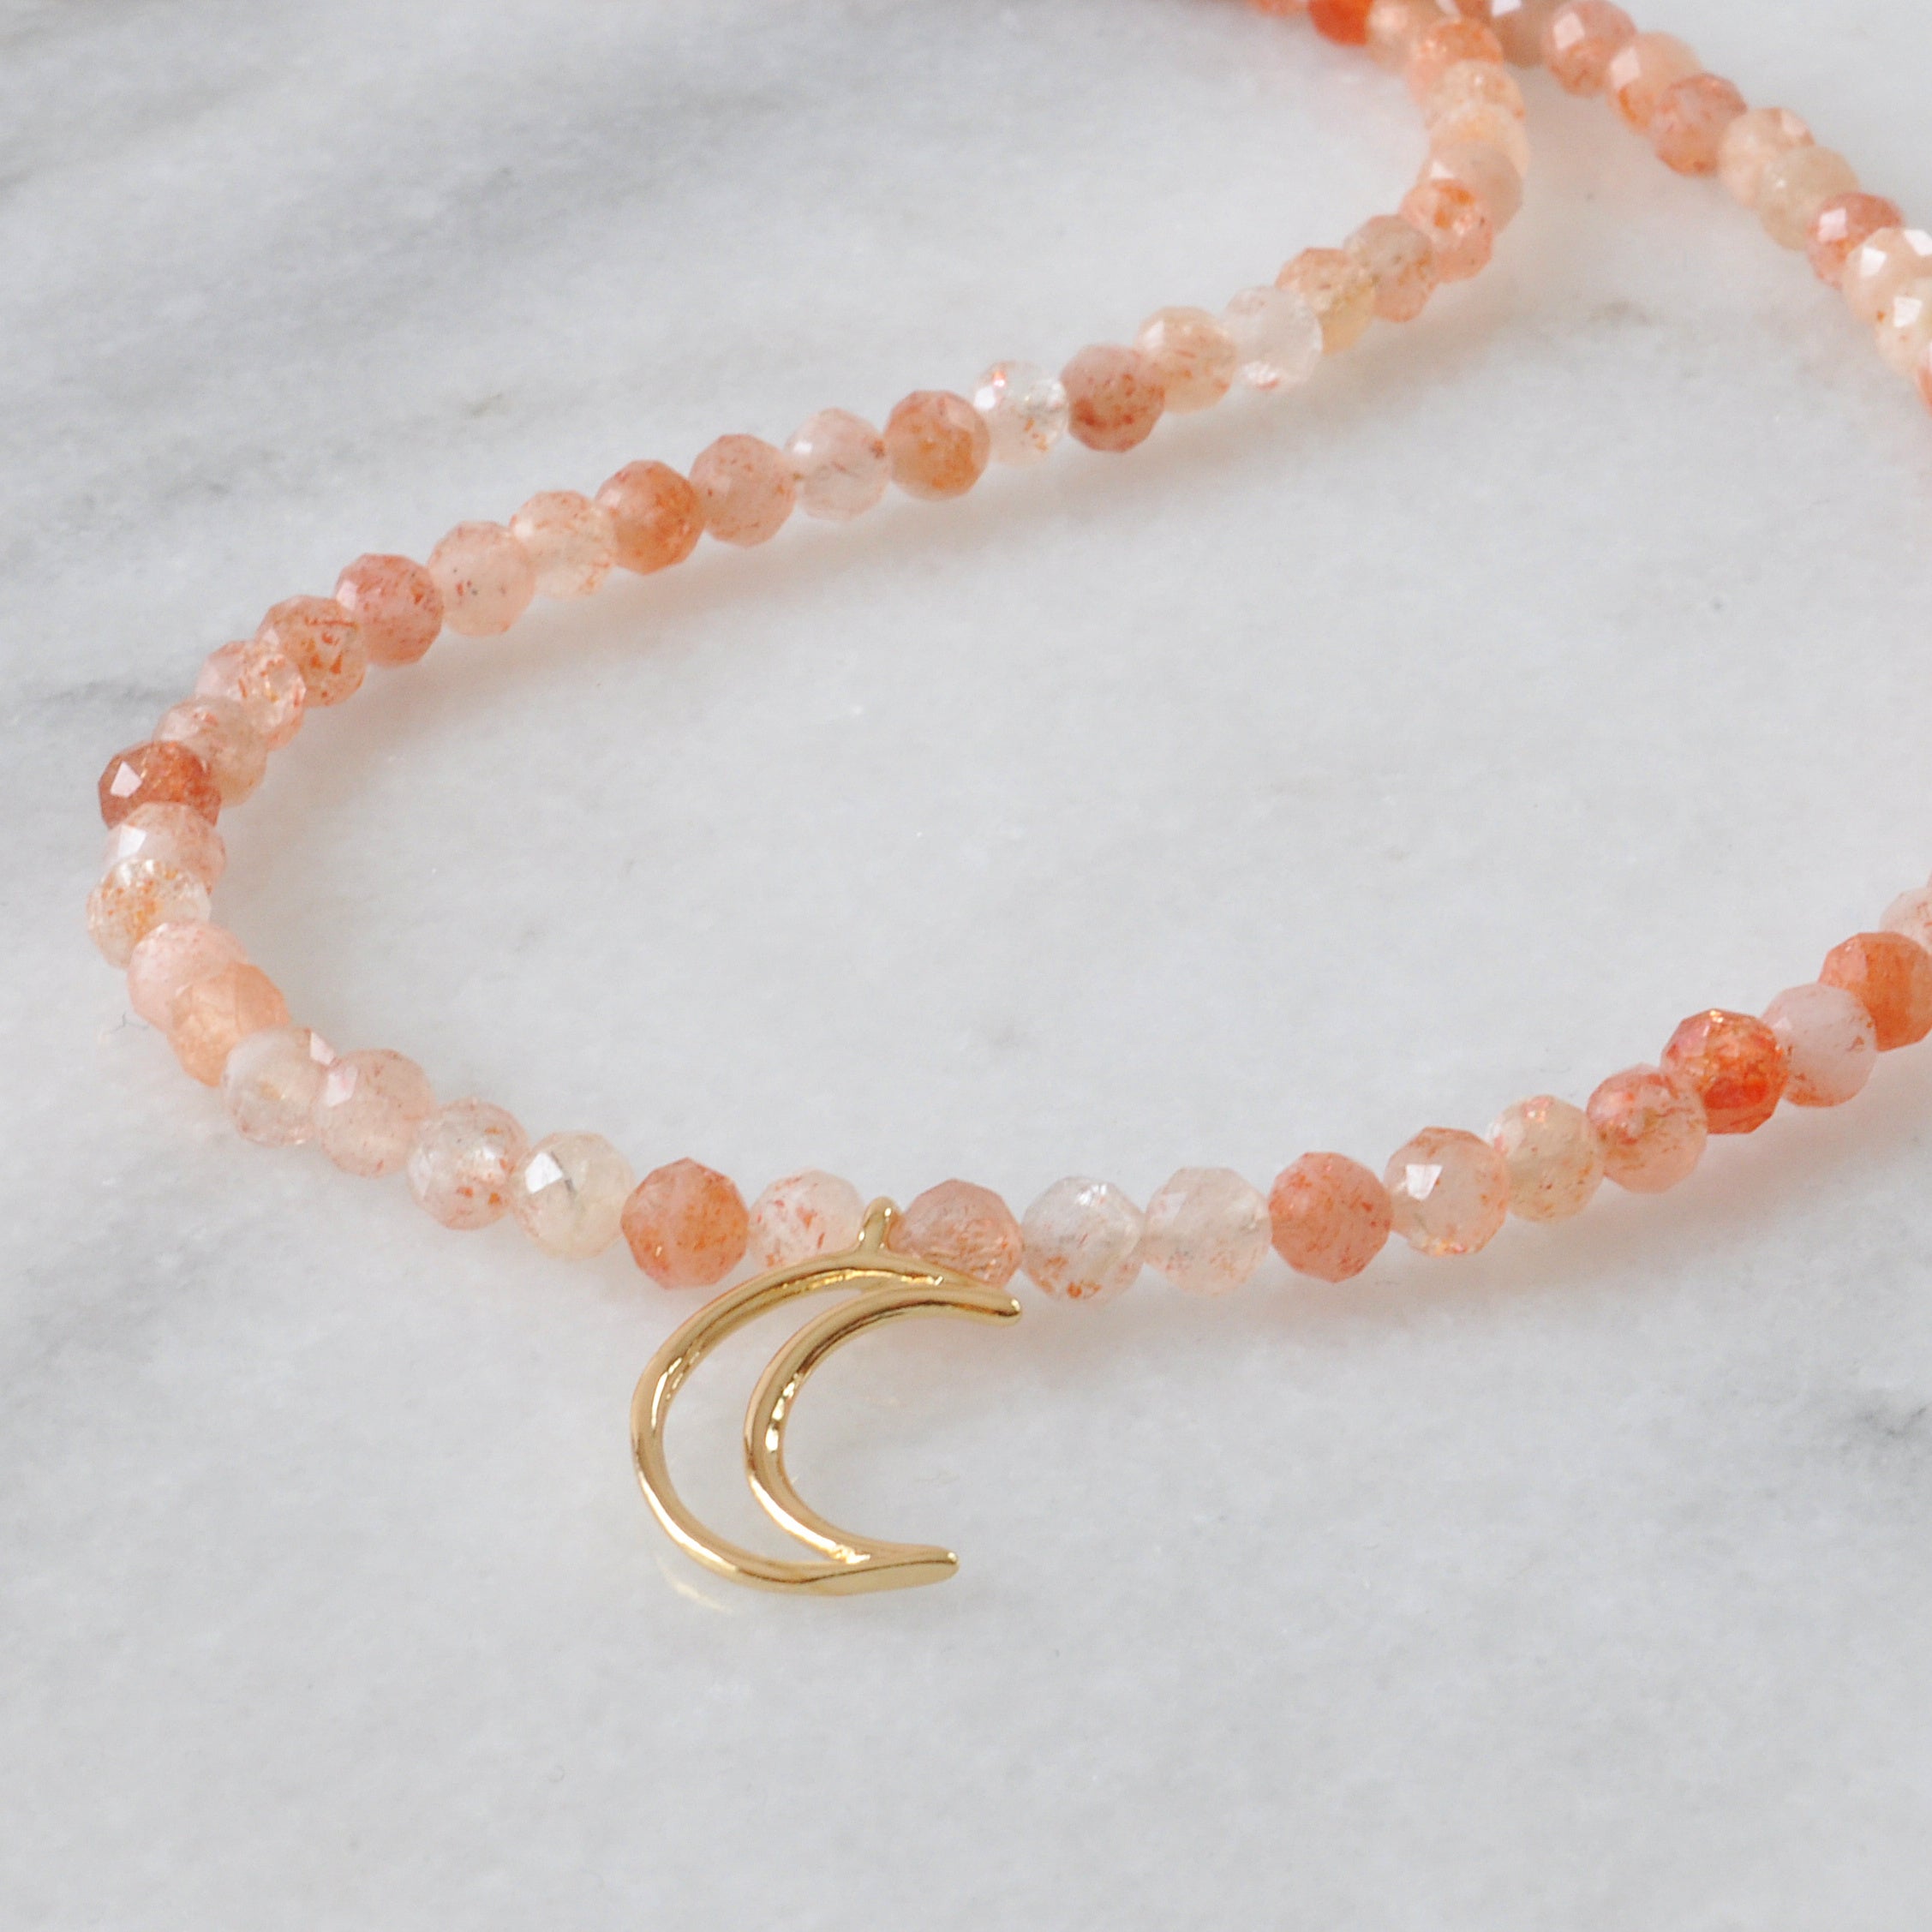 Moonstone Gemstone Choker Necklace with Gold Moon Charm